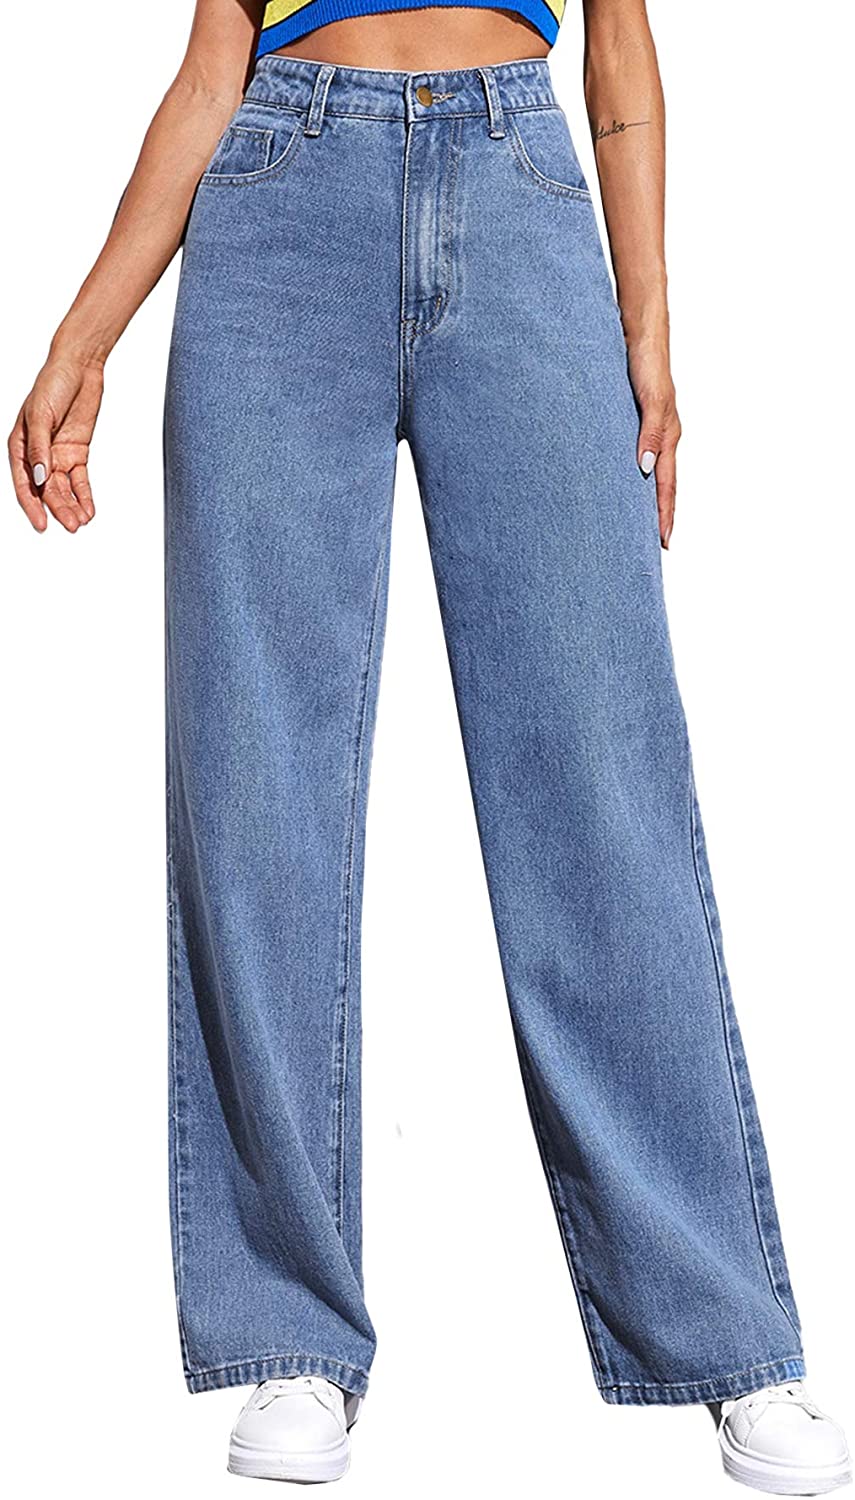 Soly Hux + Women’s High Waisted Wide Leg Jeans